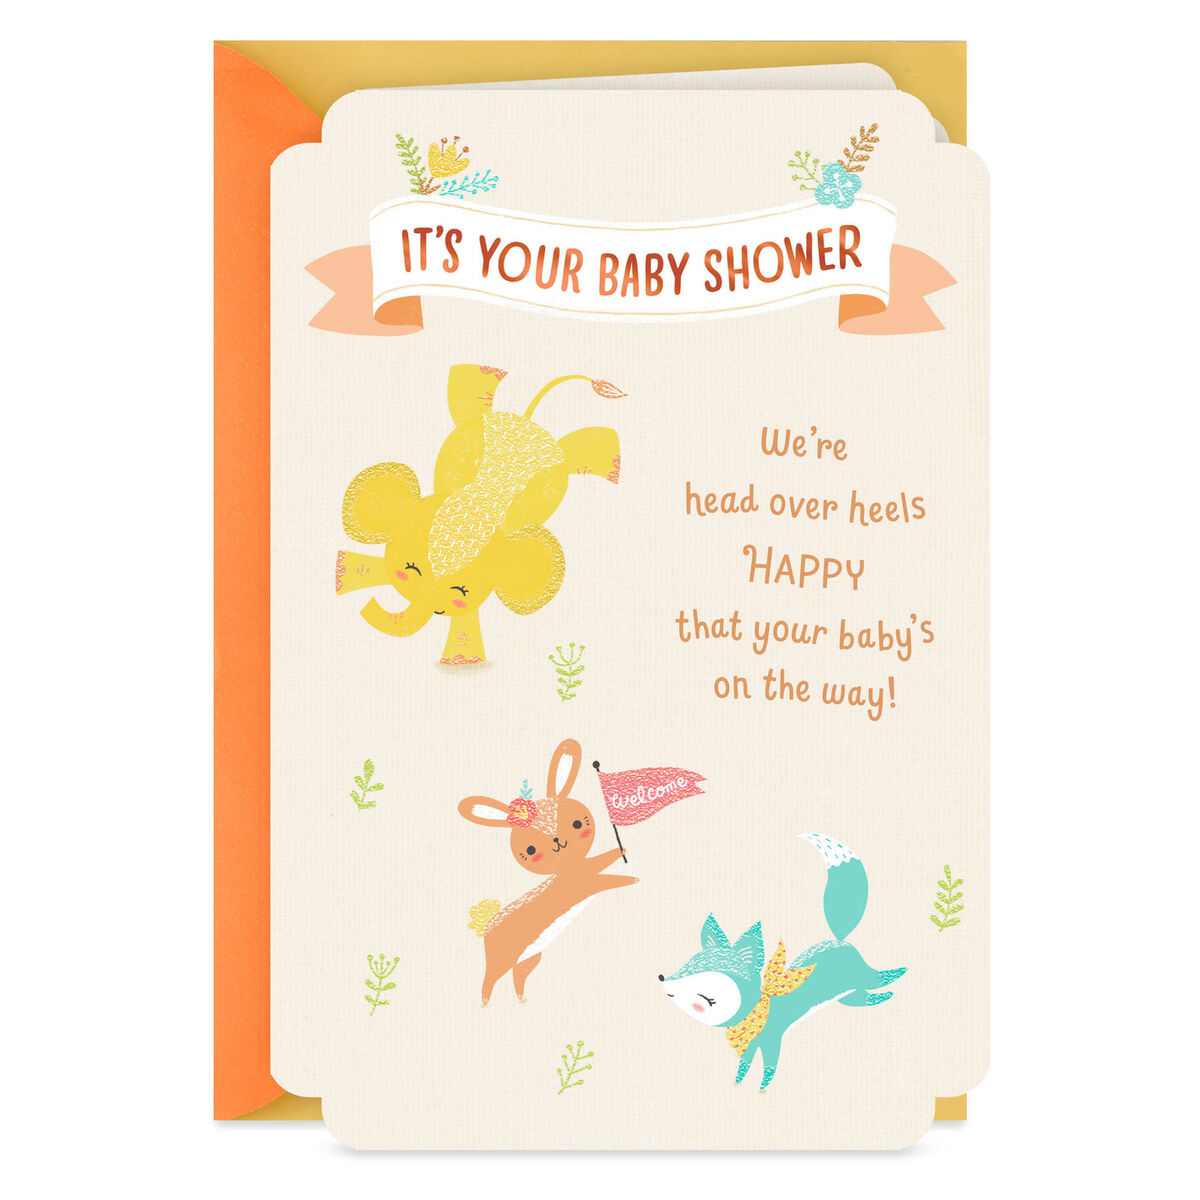 head-over-heels-happy-baby-shower-card-for-new-baby-greeting-cards